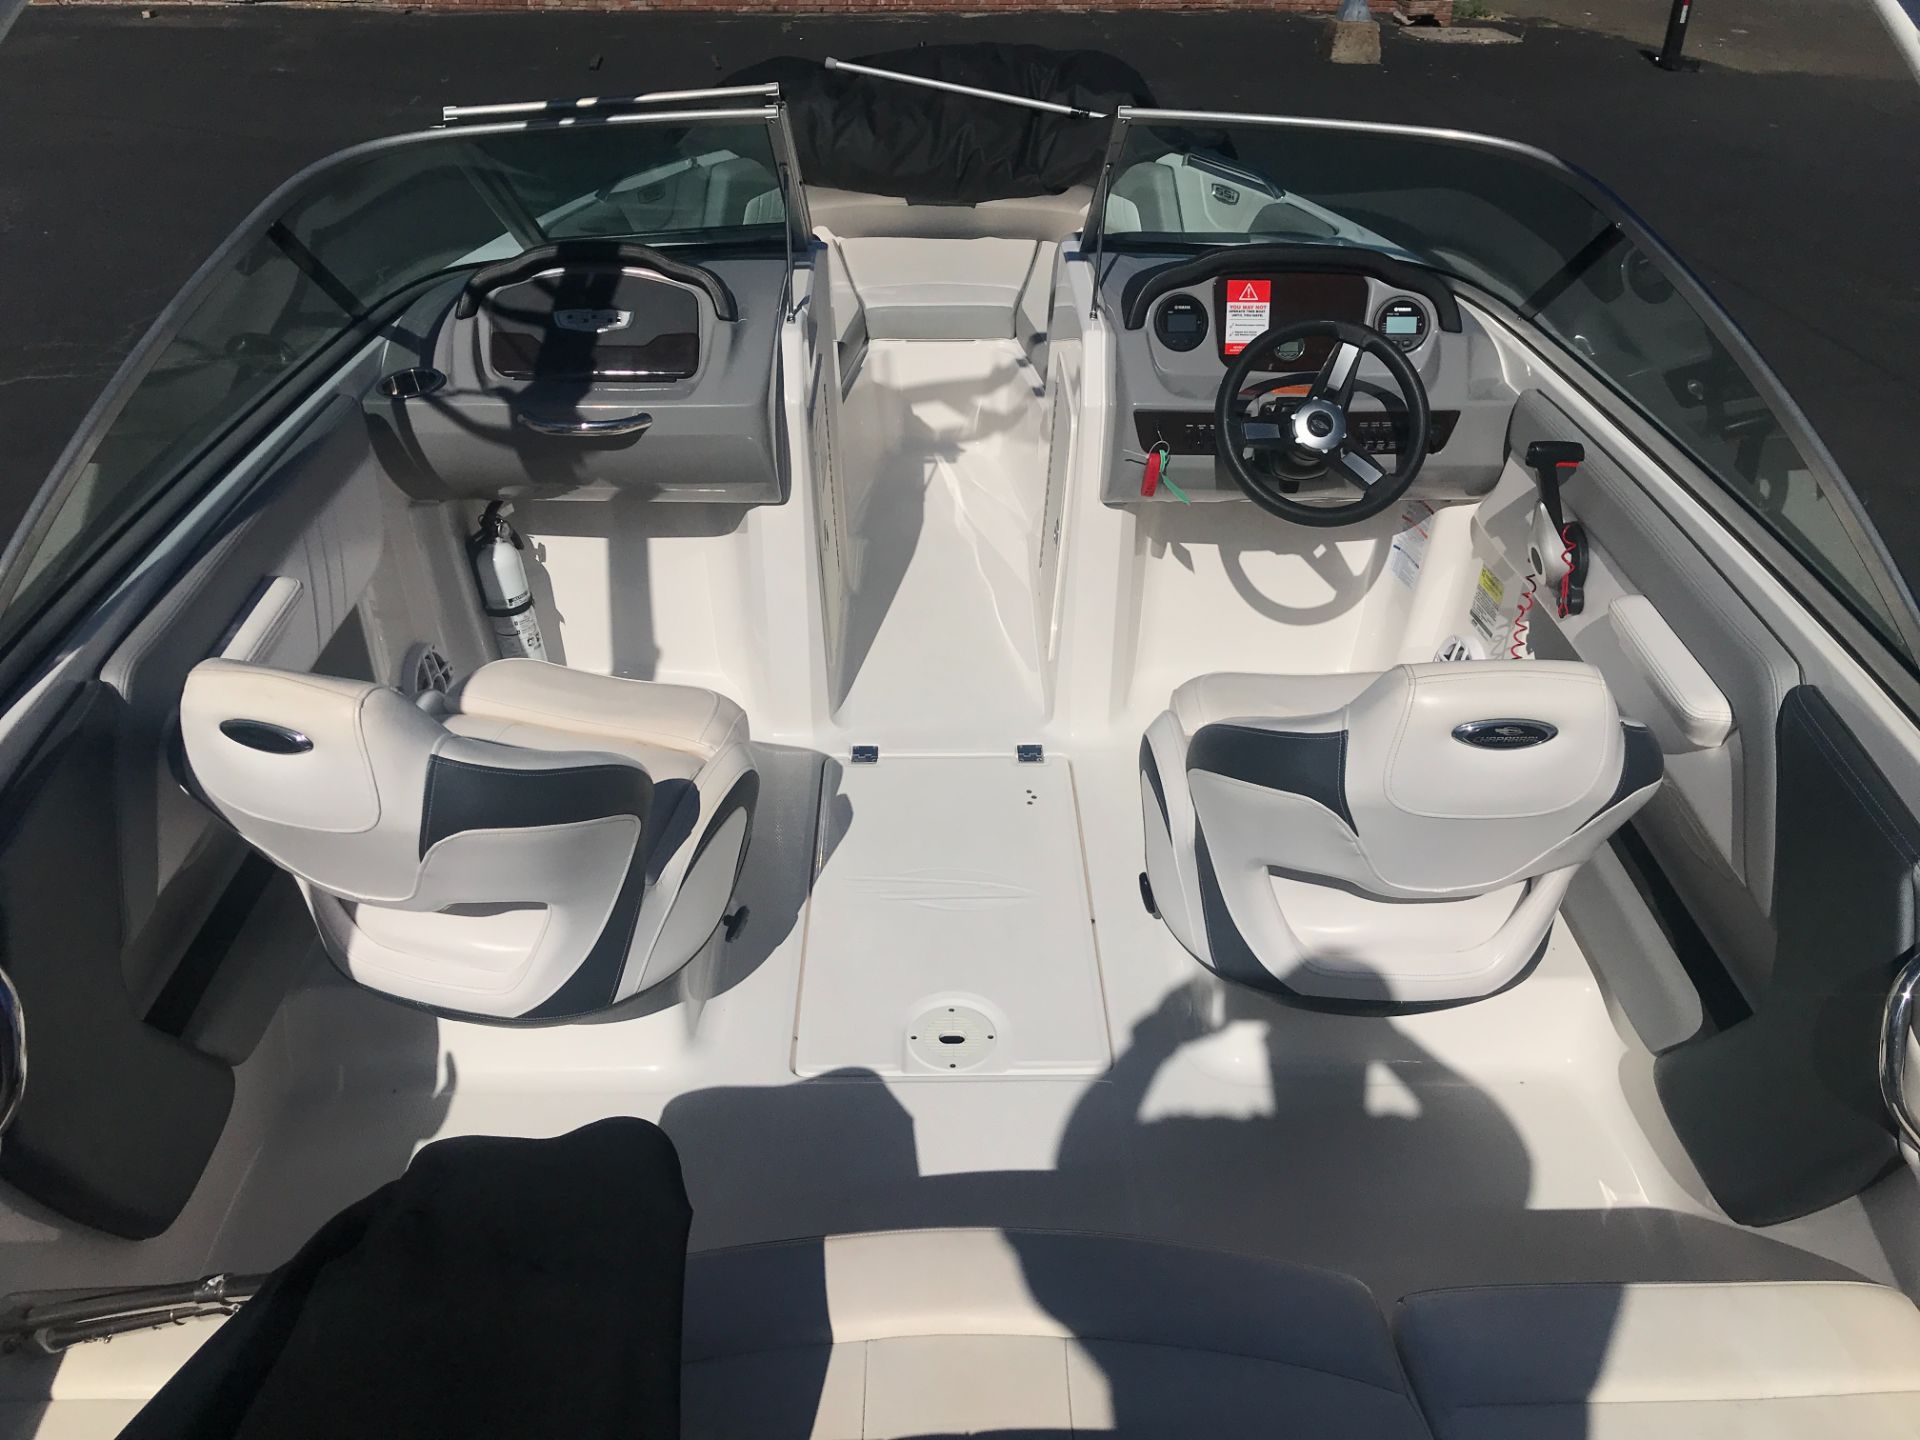 2021 Chaparral 21 SSI OUTBOARD in Lakeport, California - Photo 4